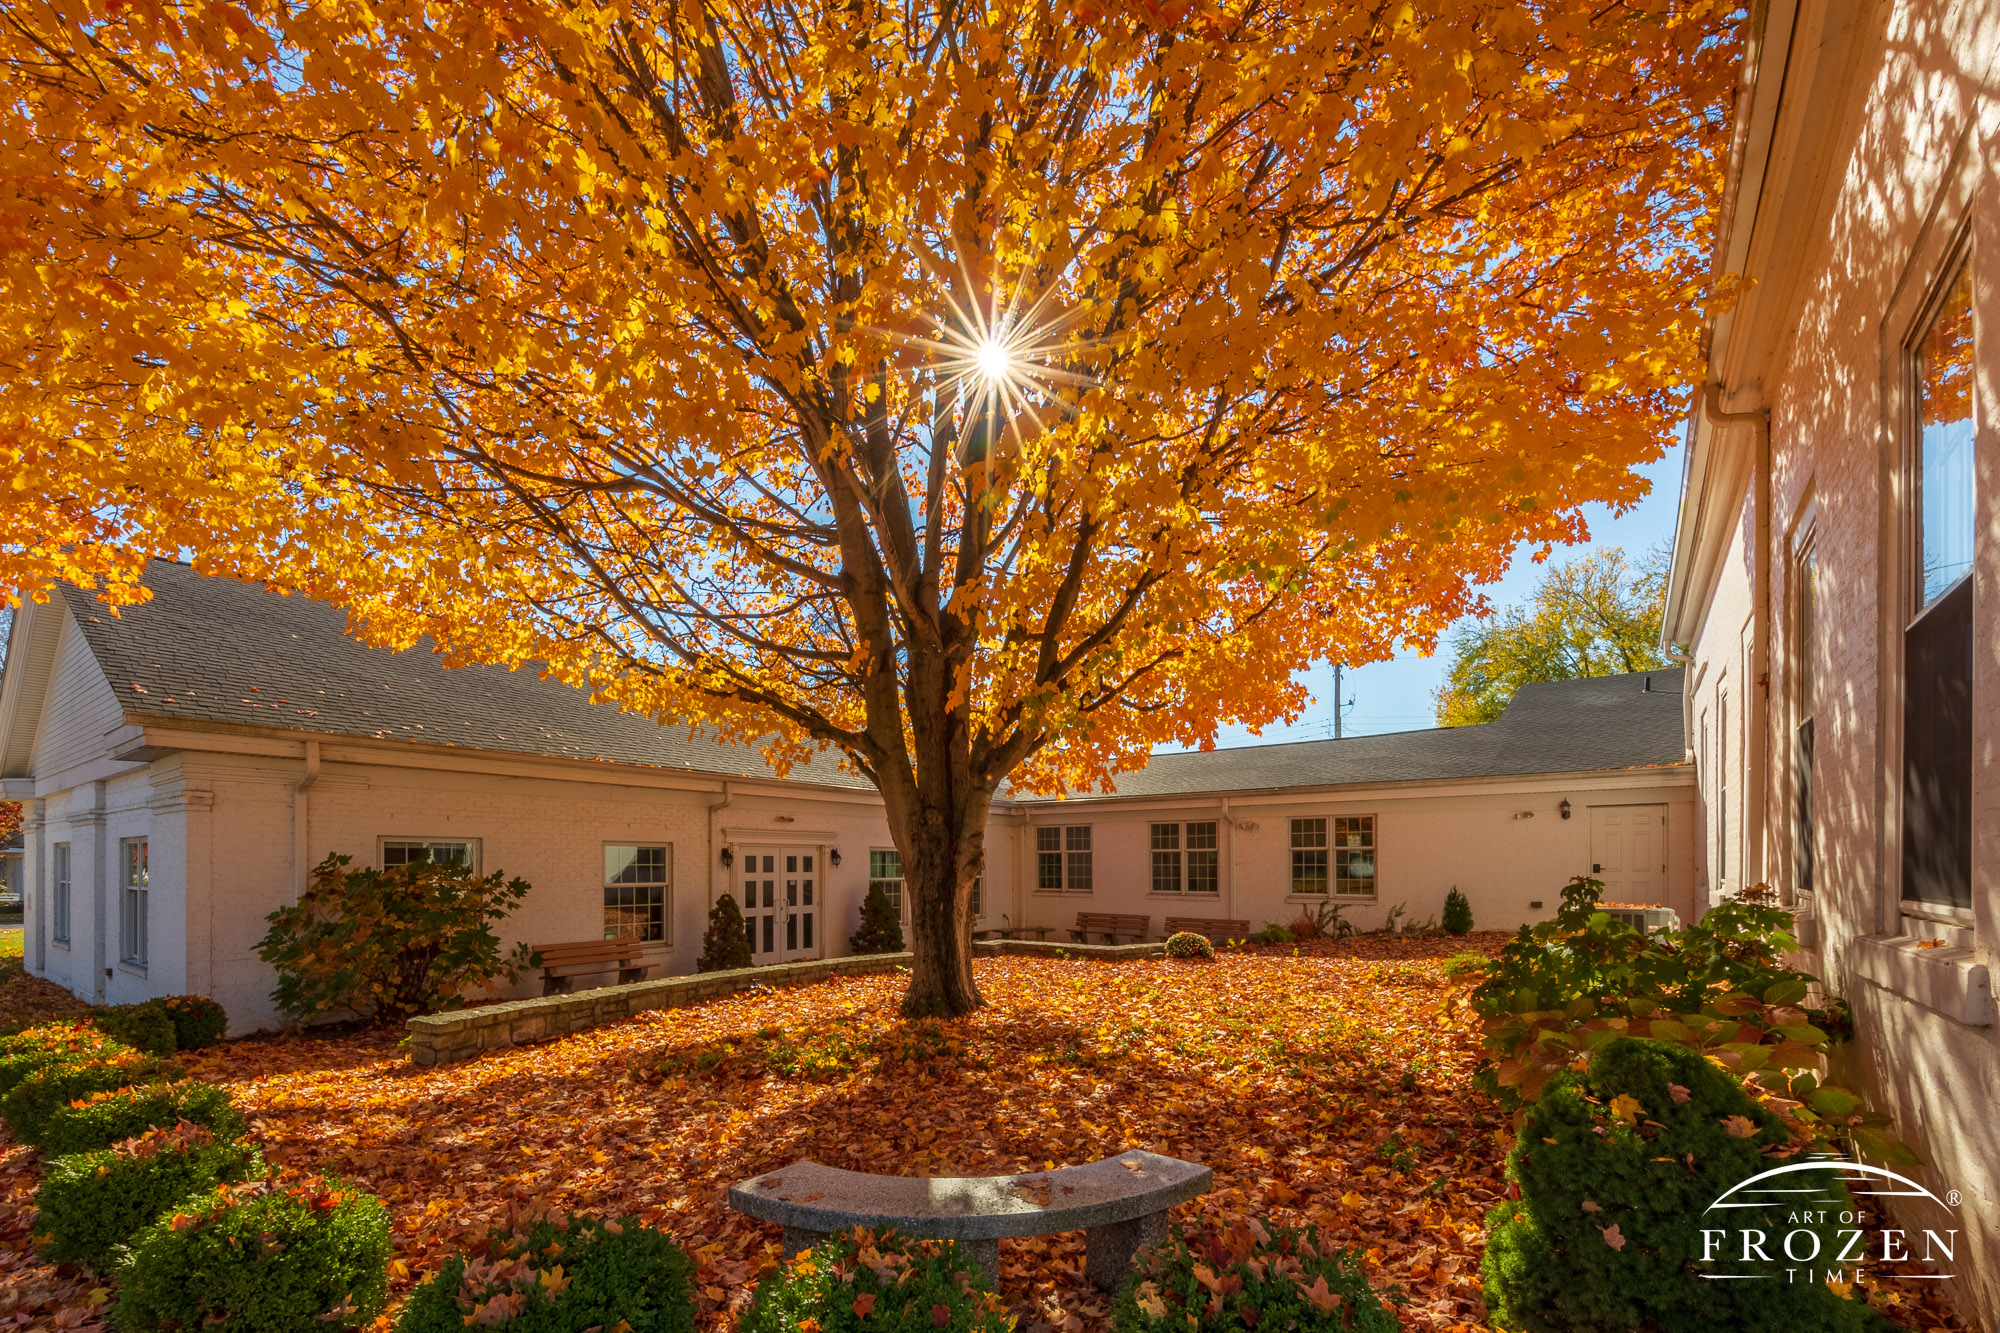 A sunny fall day in Bellbrook Ohio where the sun backlights the golden leaves of its courtyard maple tree